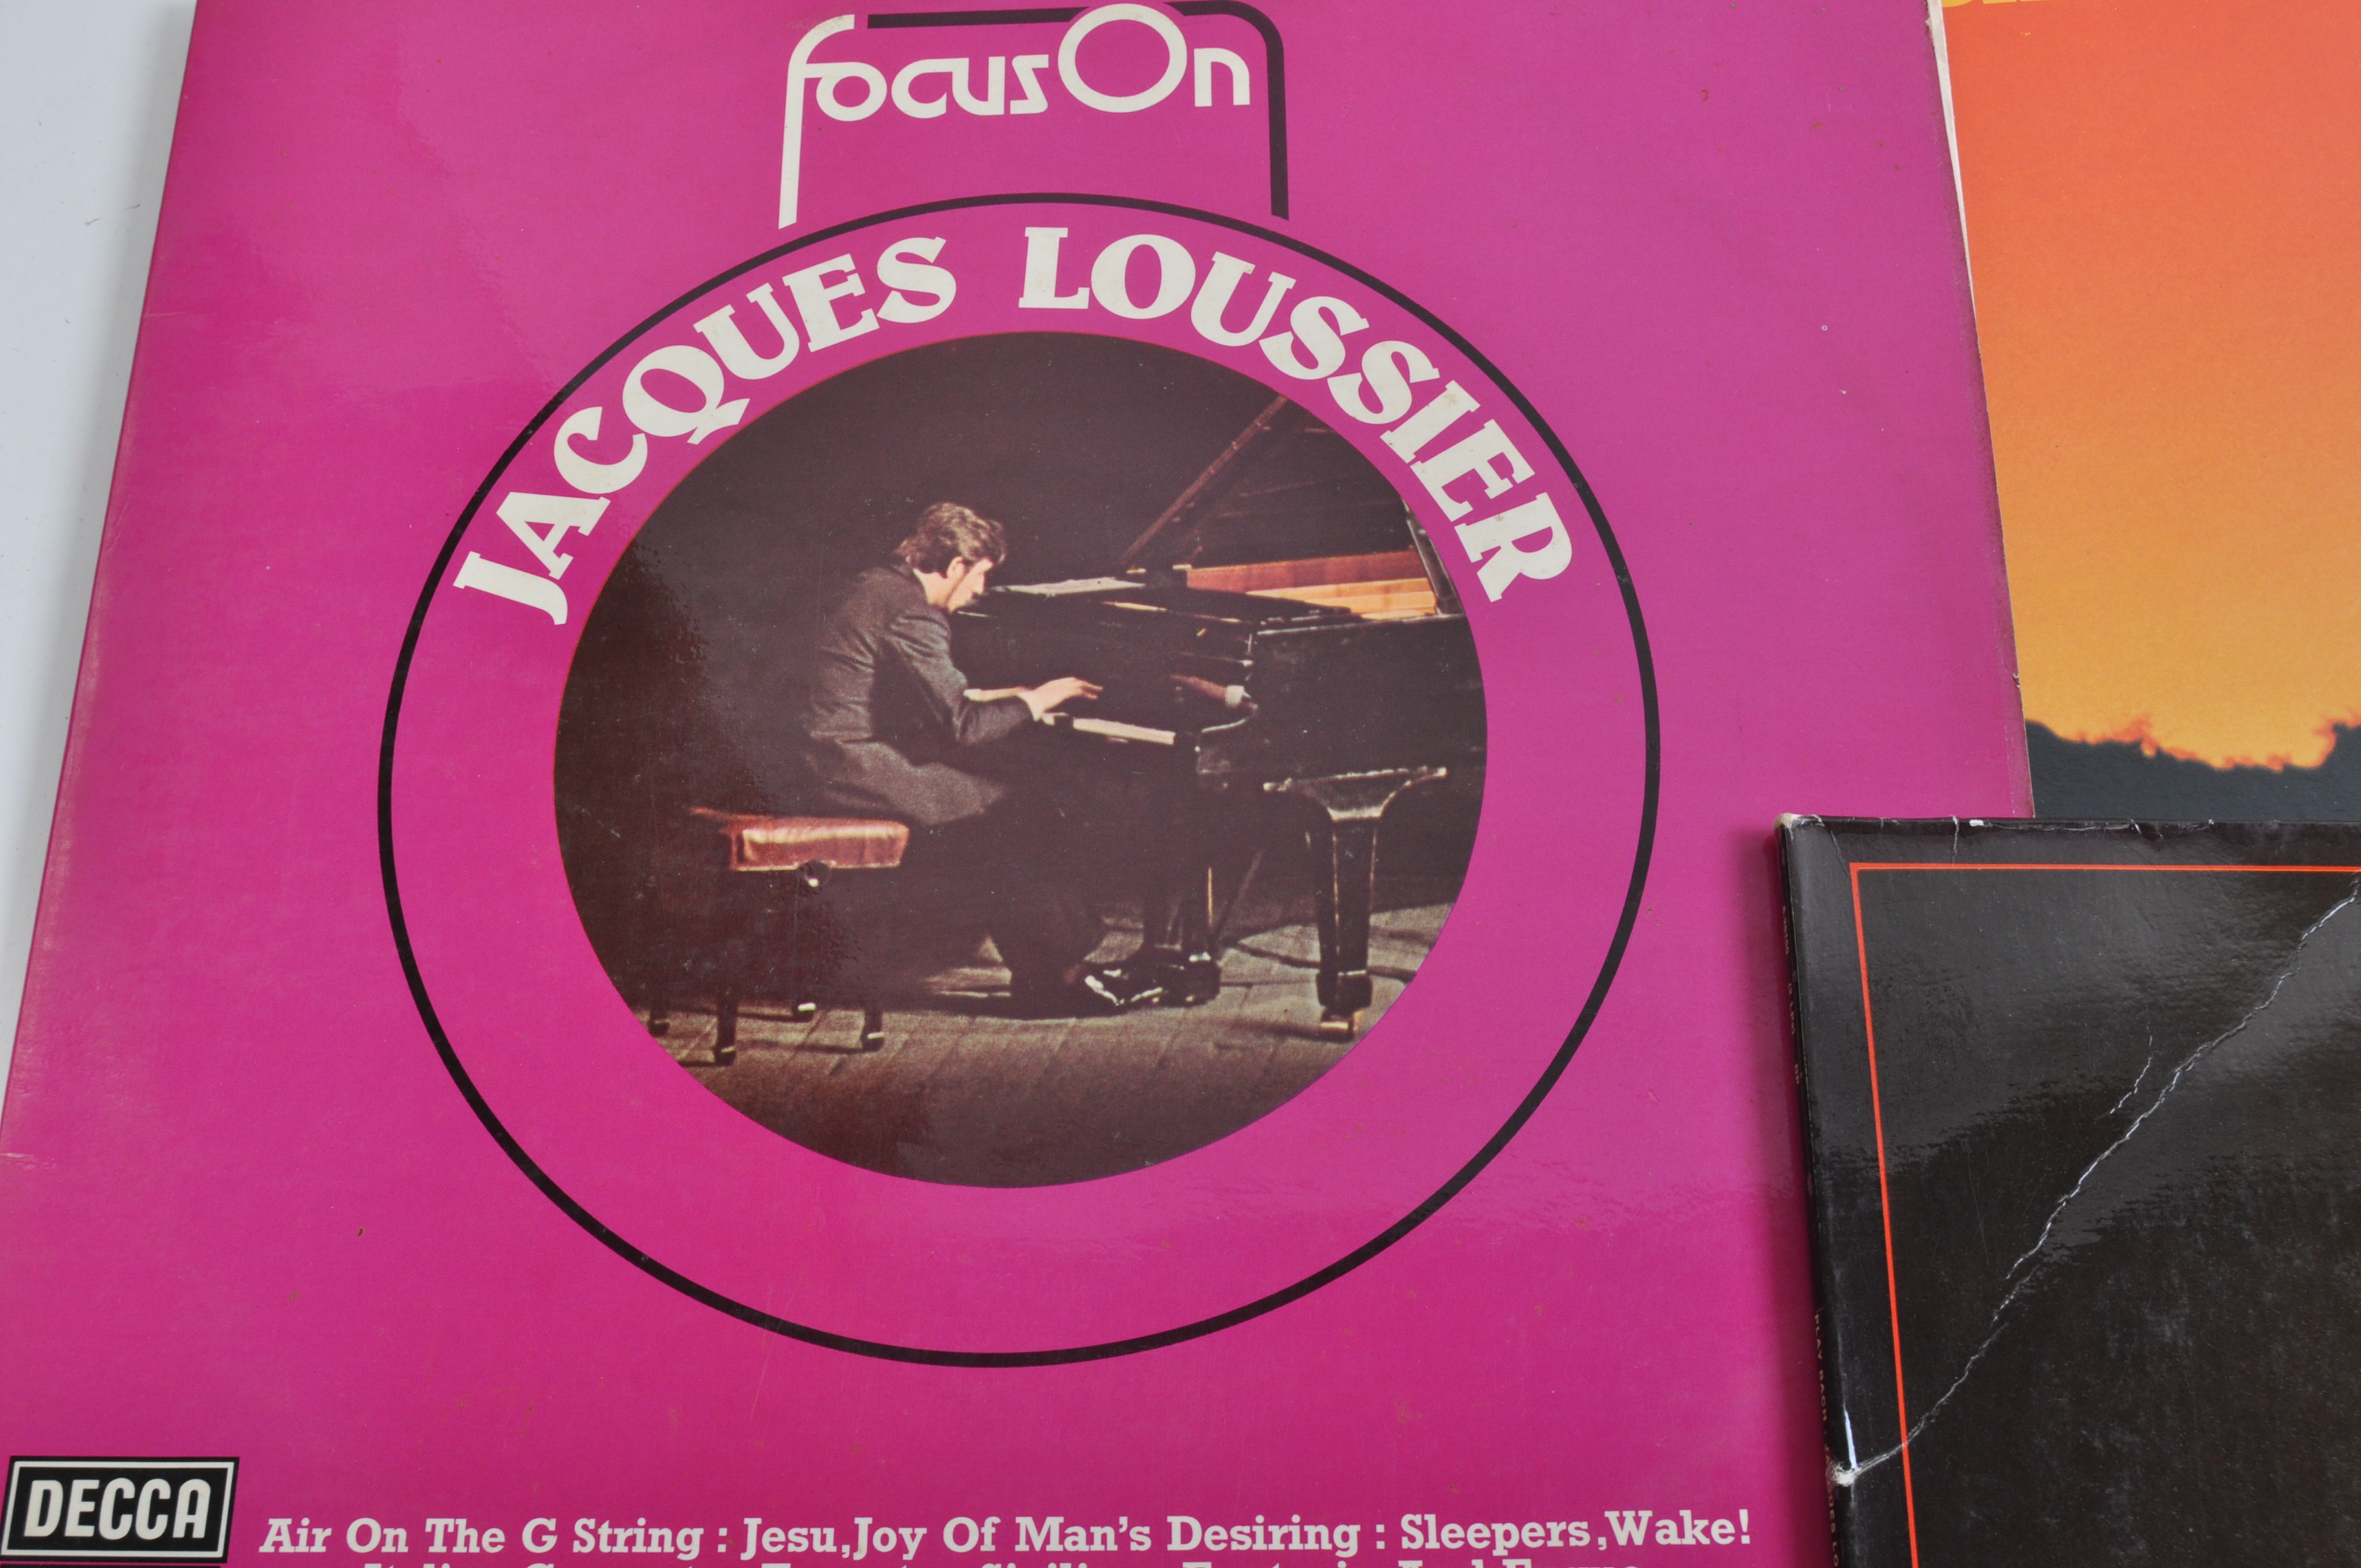 JACQUES LOUSSIER GROUP OF VINYL RECORD ALBUMS - Image 4 of 7